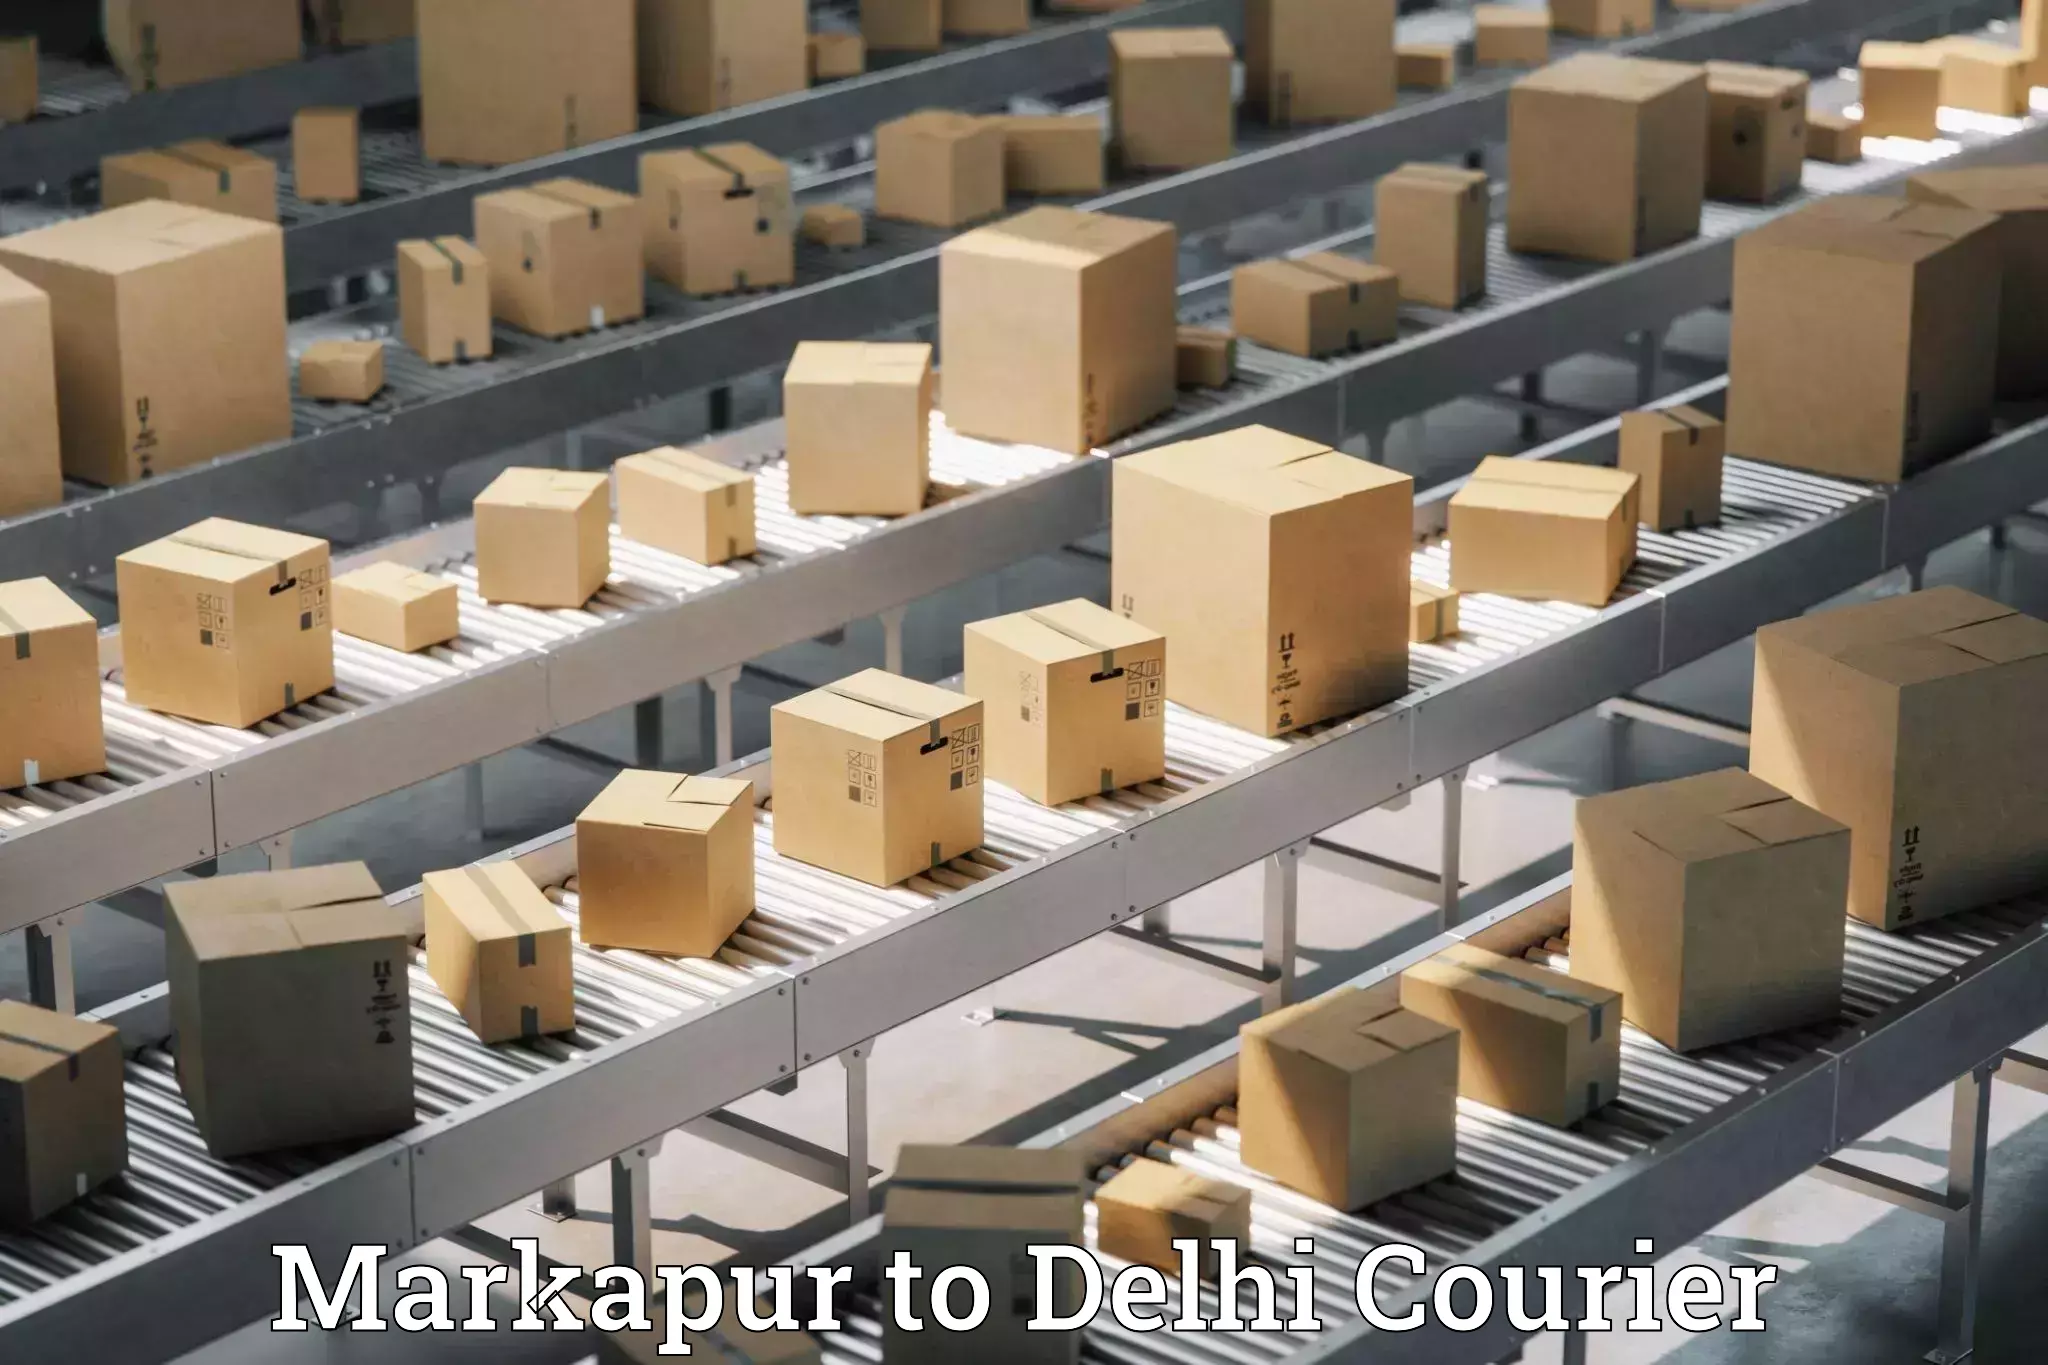 State-of-the-art courier technology Markapur to NCR